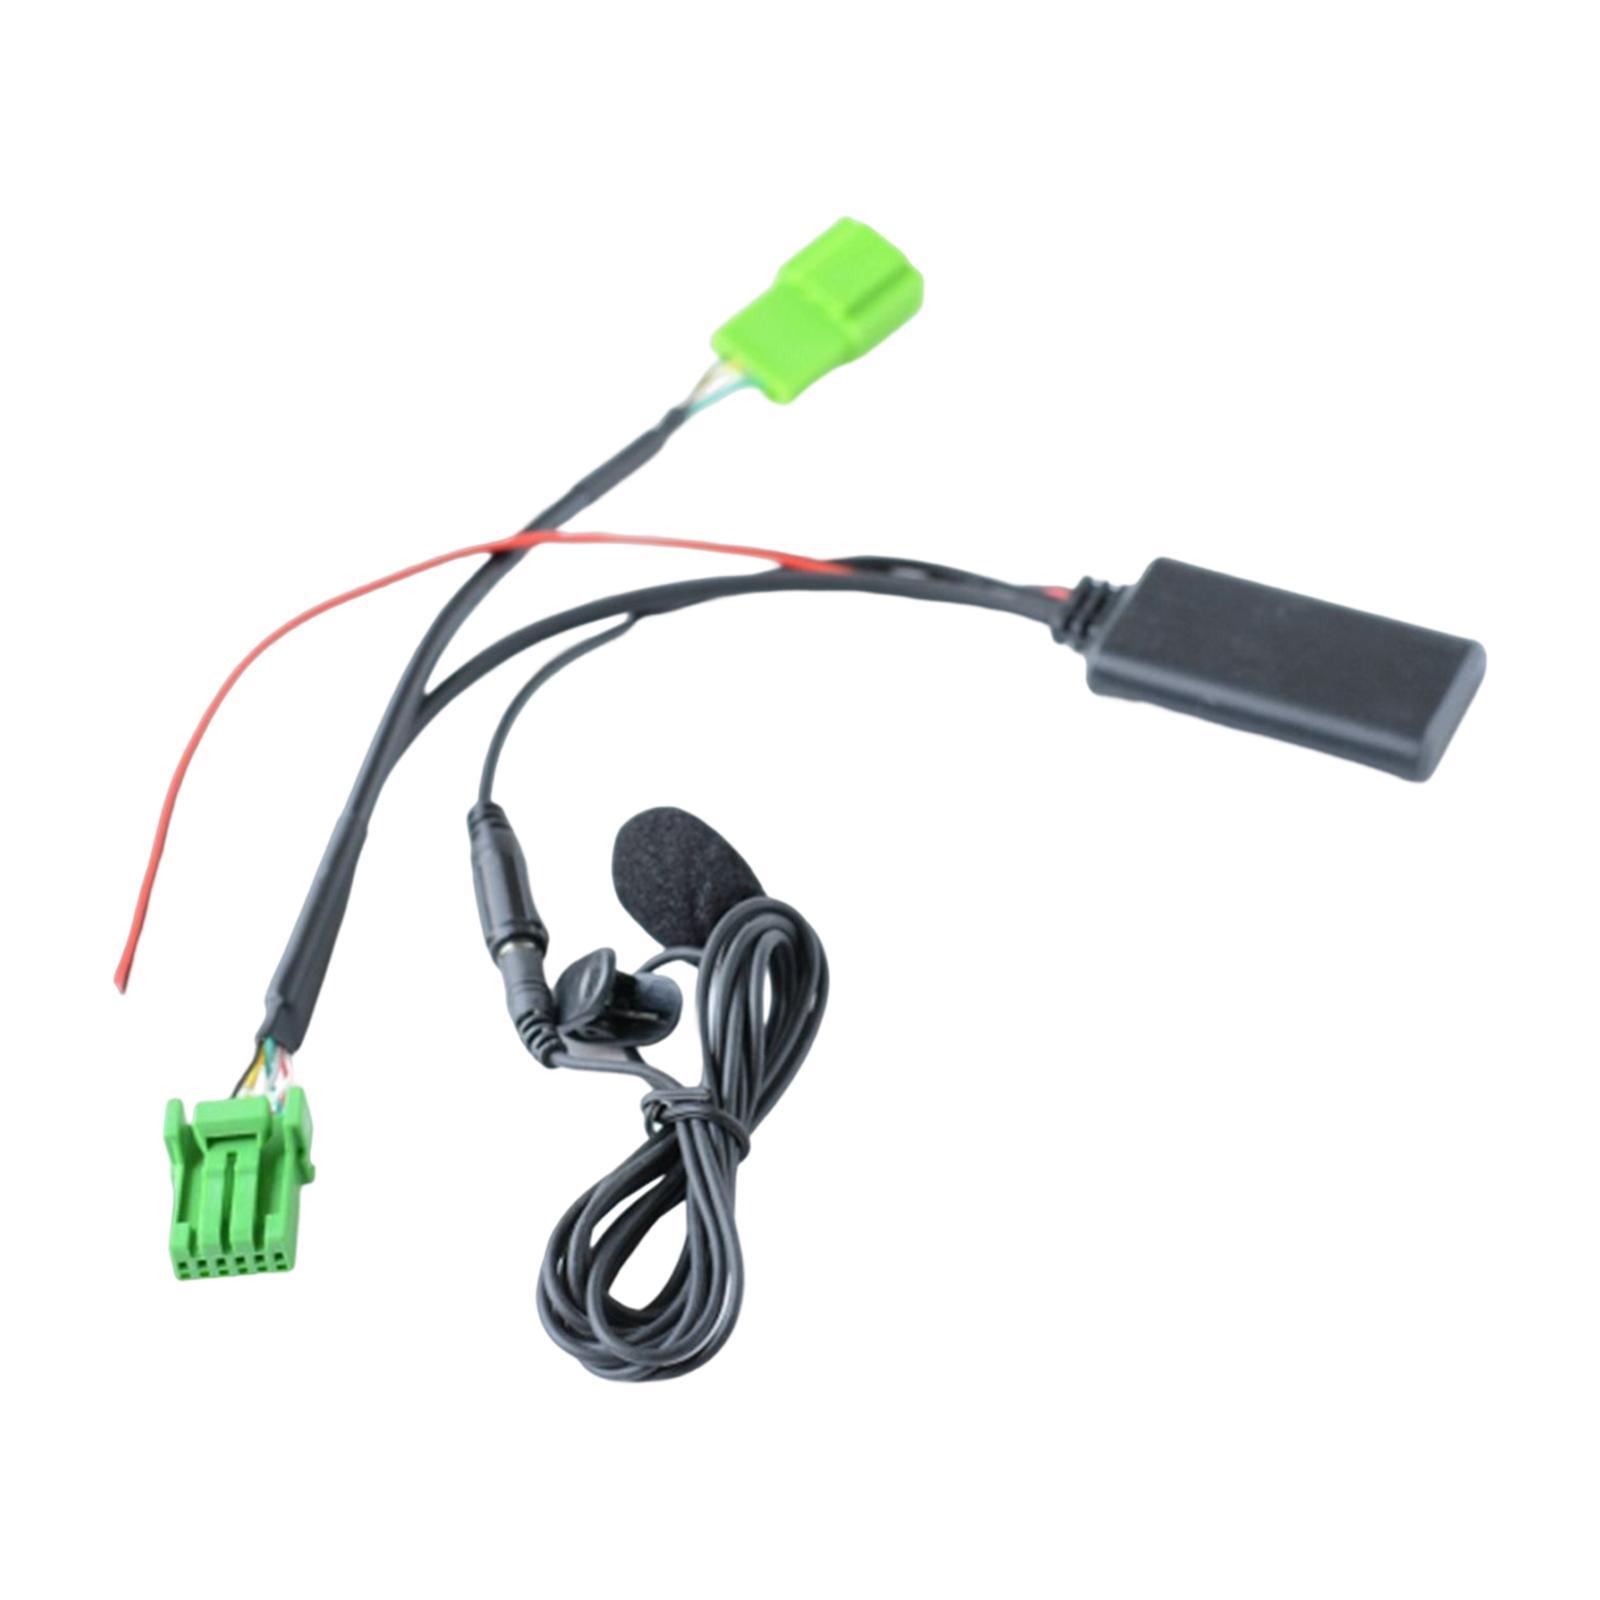 Car radio Audio Cable Adapter with Mic for